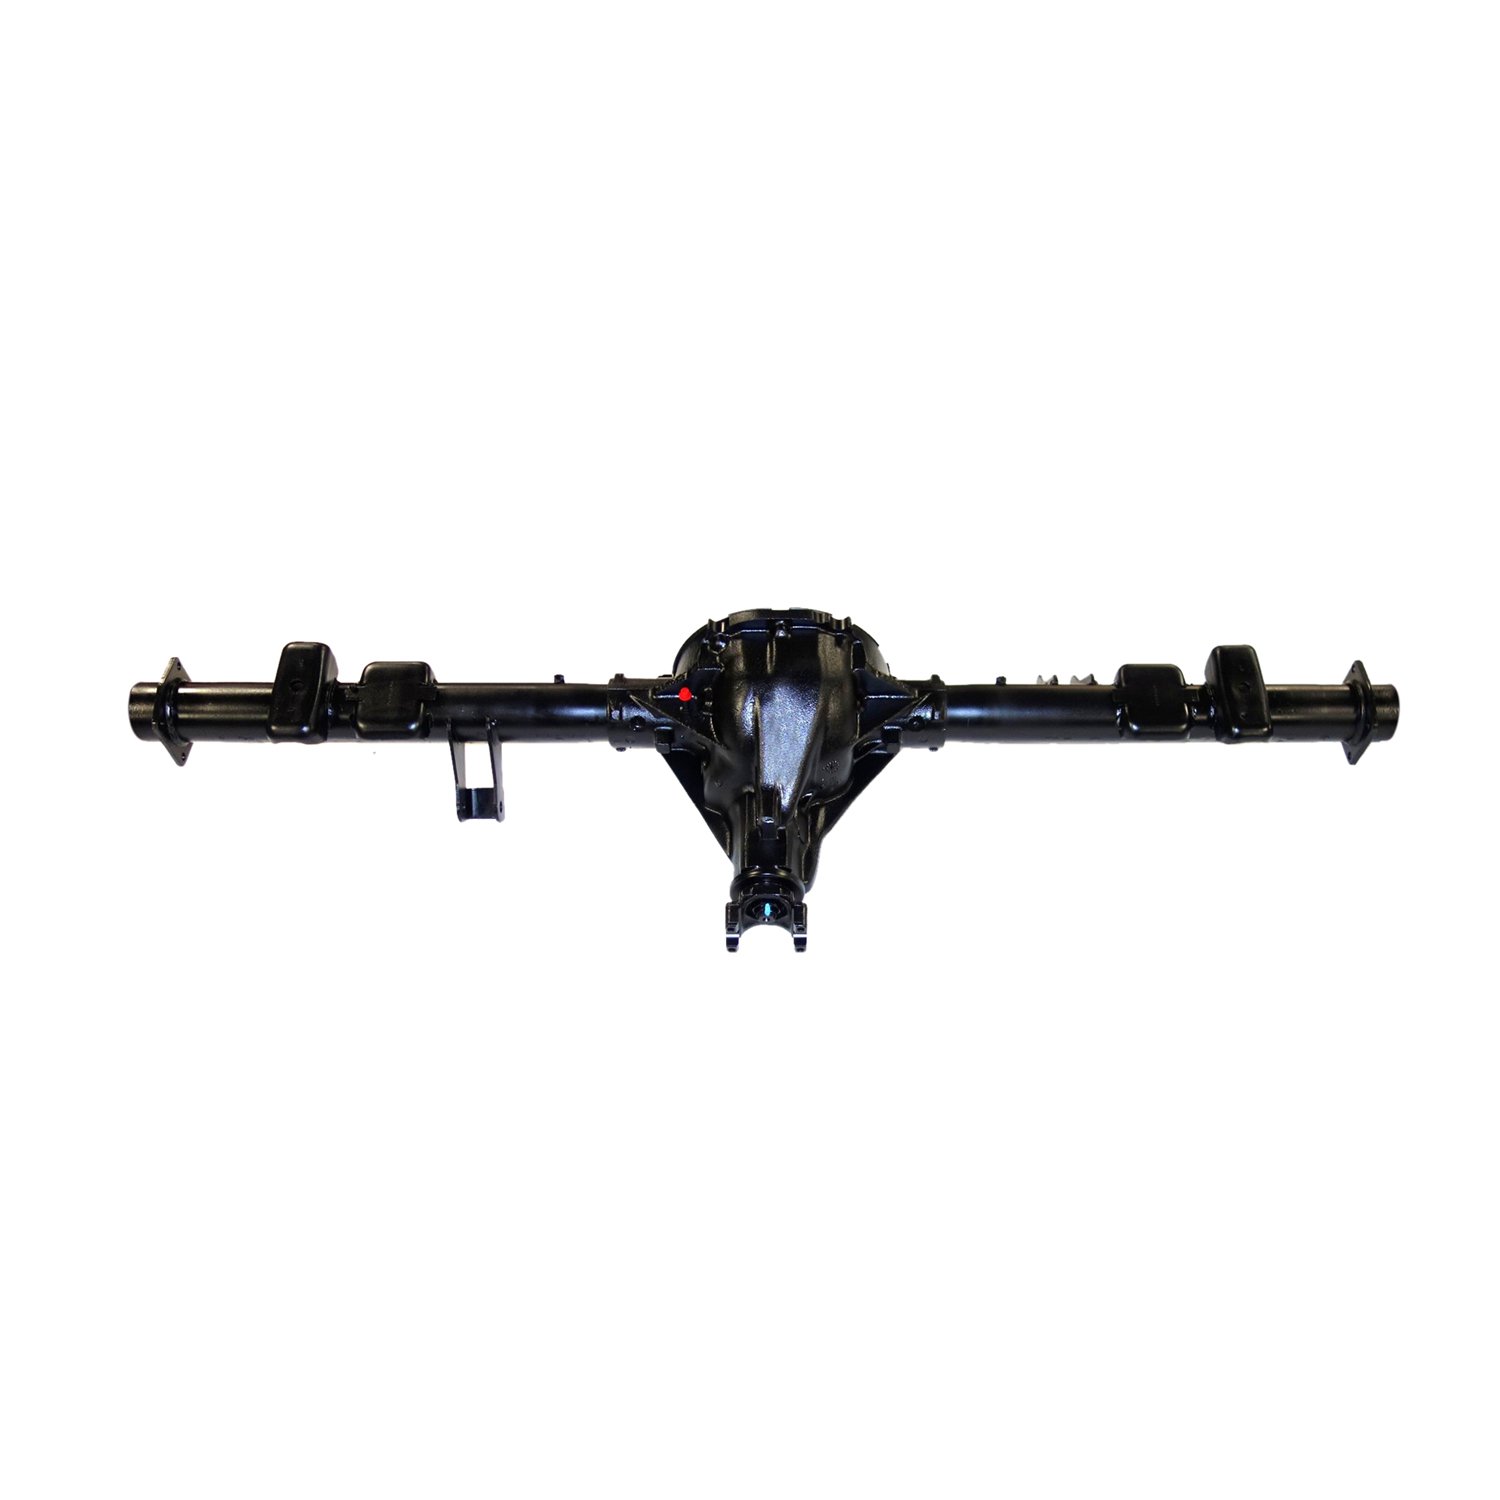 Remanufactured Axle Assy for GM 8.5" 1995 Tahoe & GMC Yukon 3.73 , 2wd, 2dr, Posi LSD